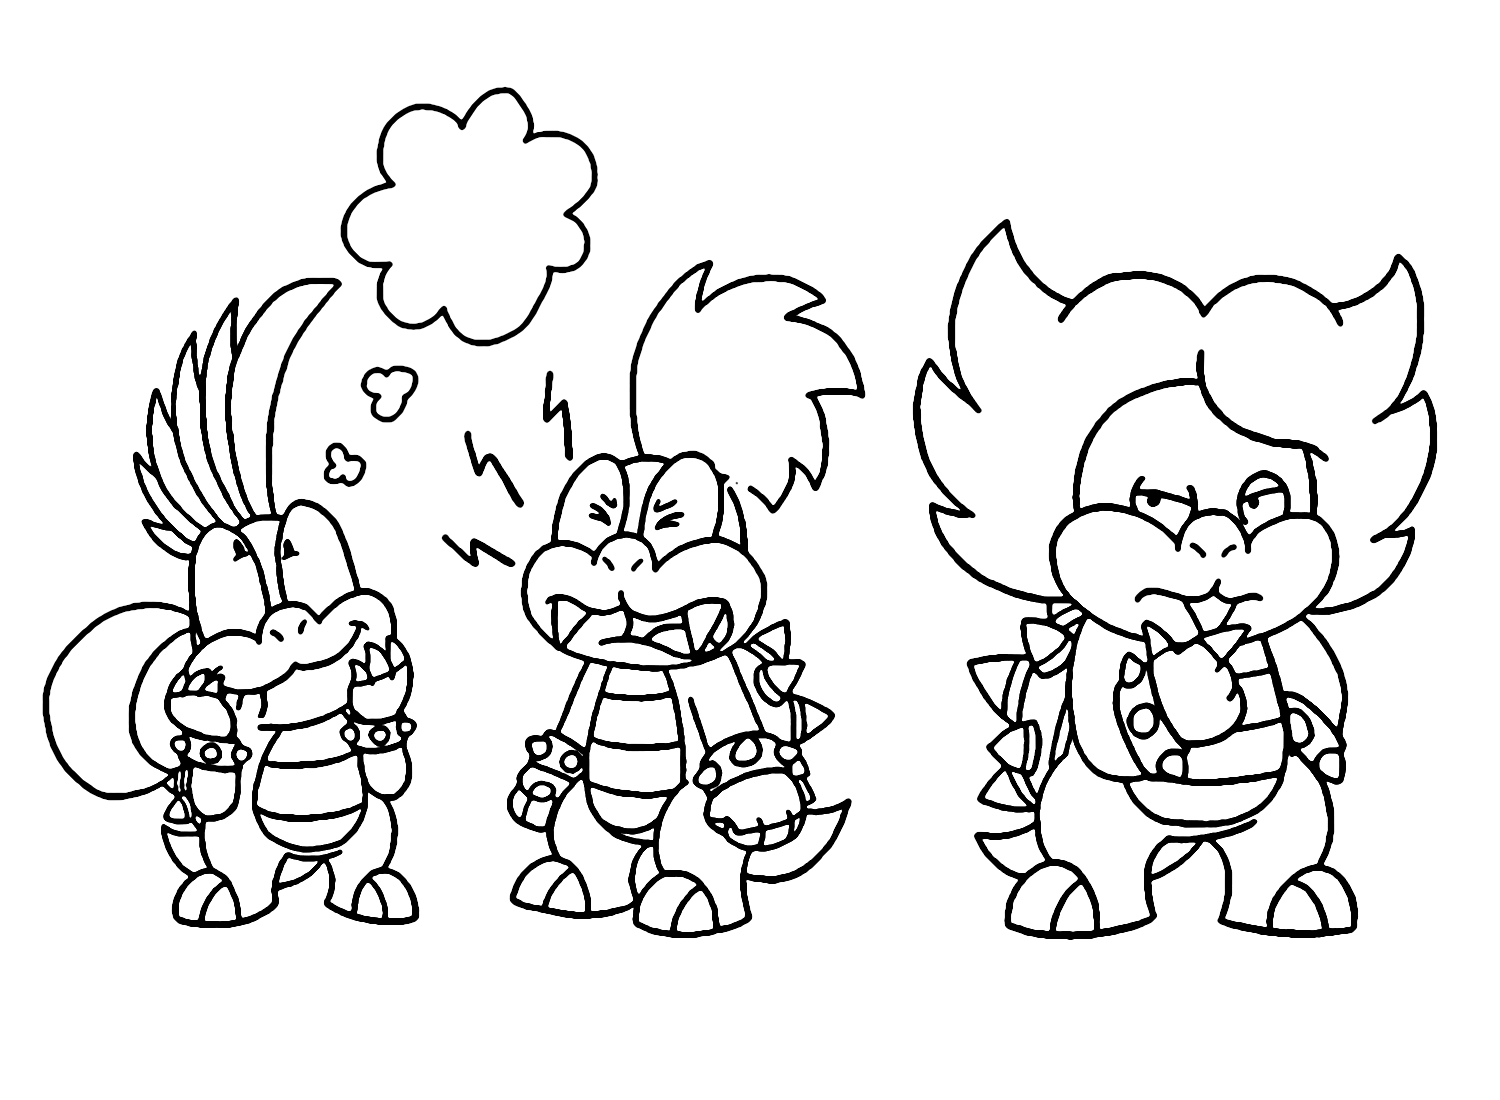 Koopalings from Super Mario Coloring Page